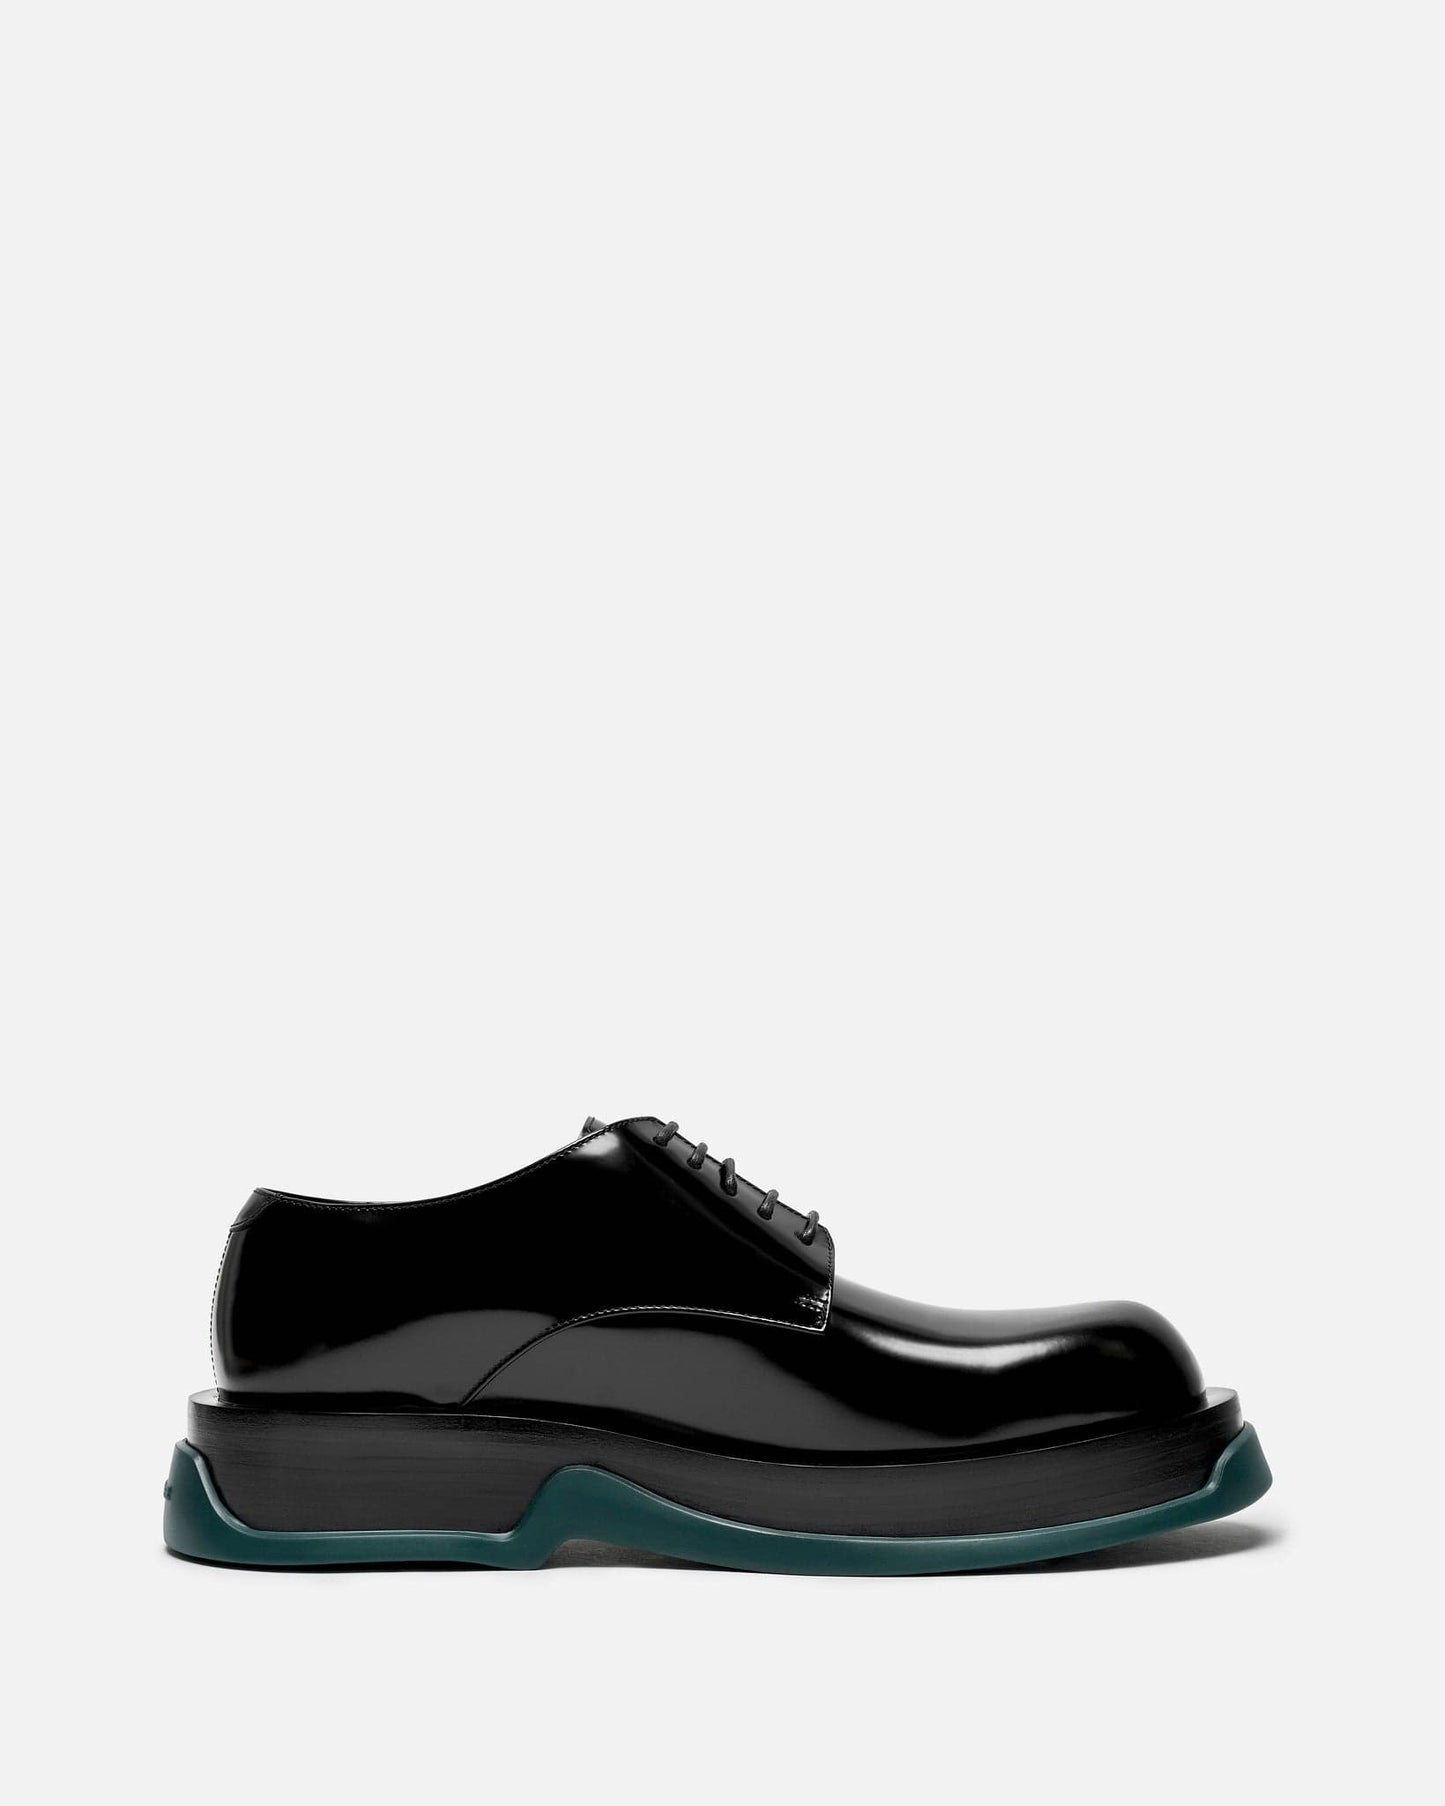 Jil Sander Men's Shoes Spazzolato Calf Leather Shoe in After Eight